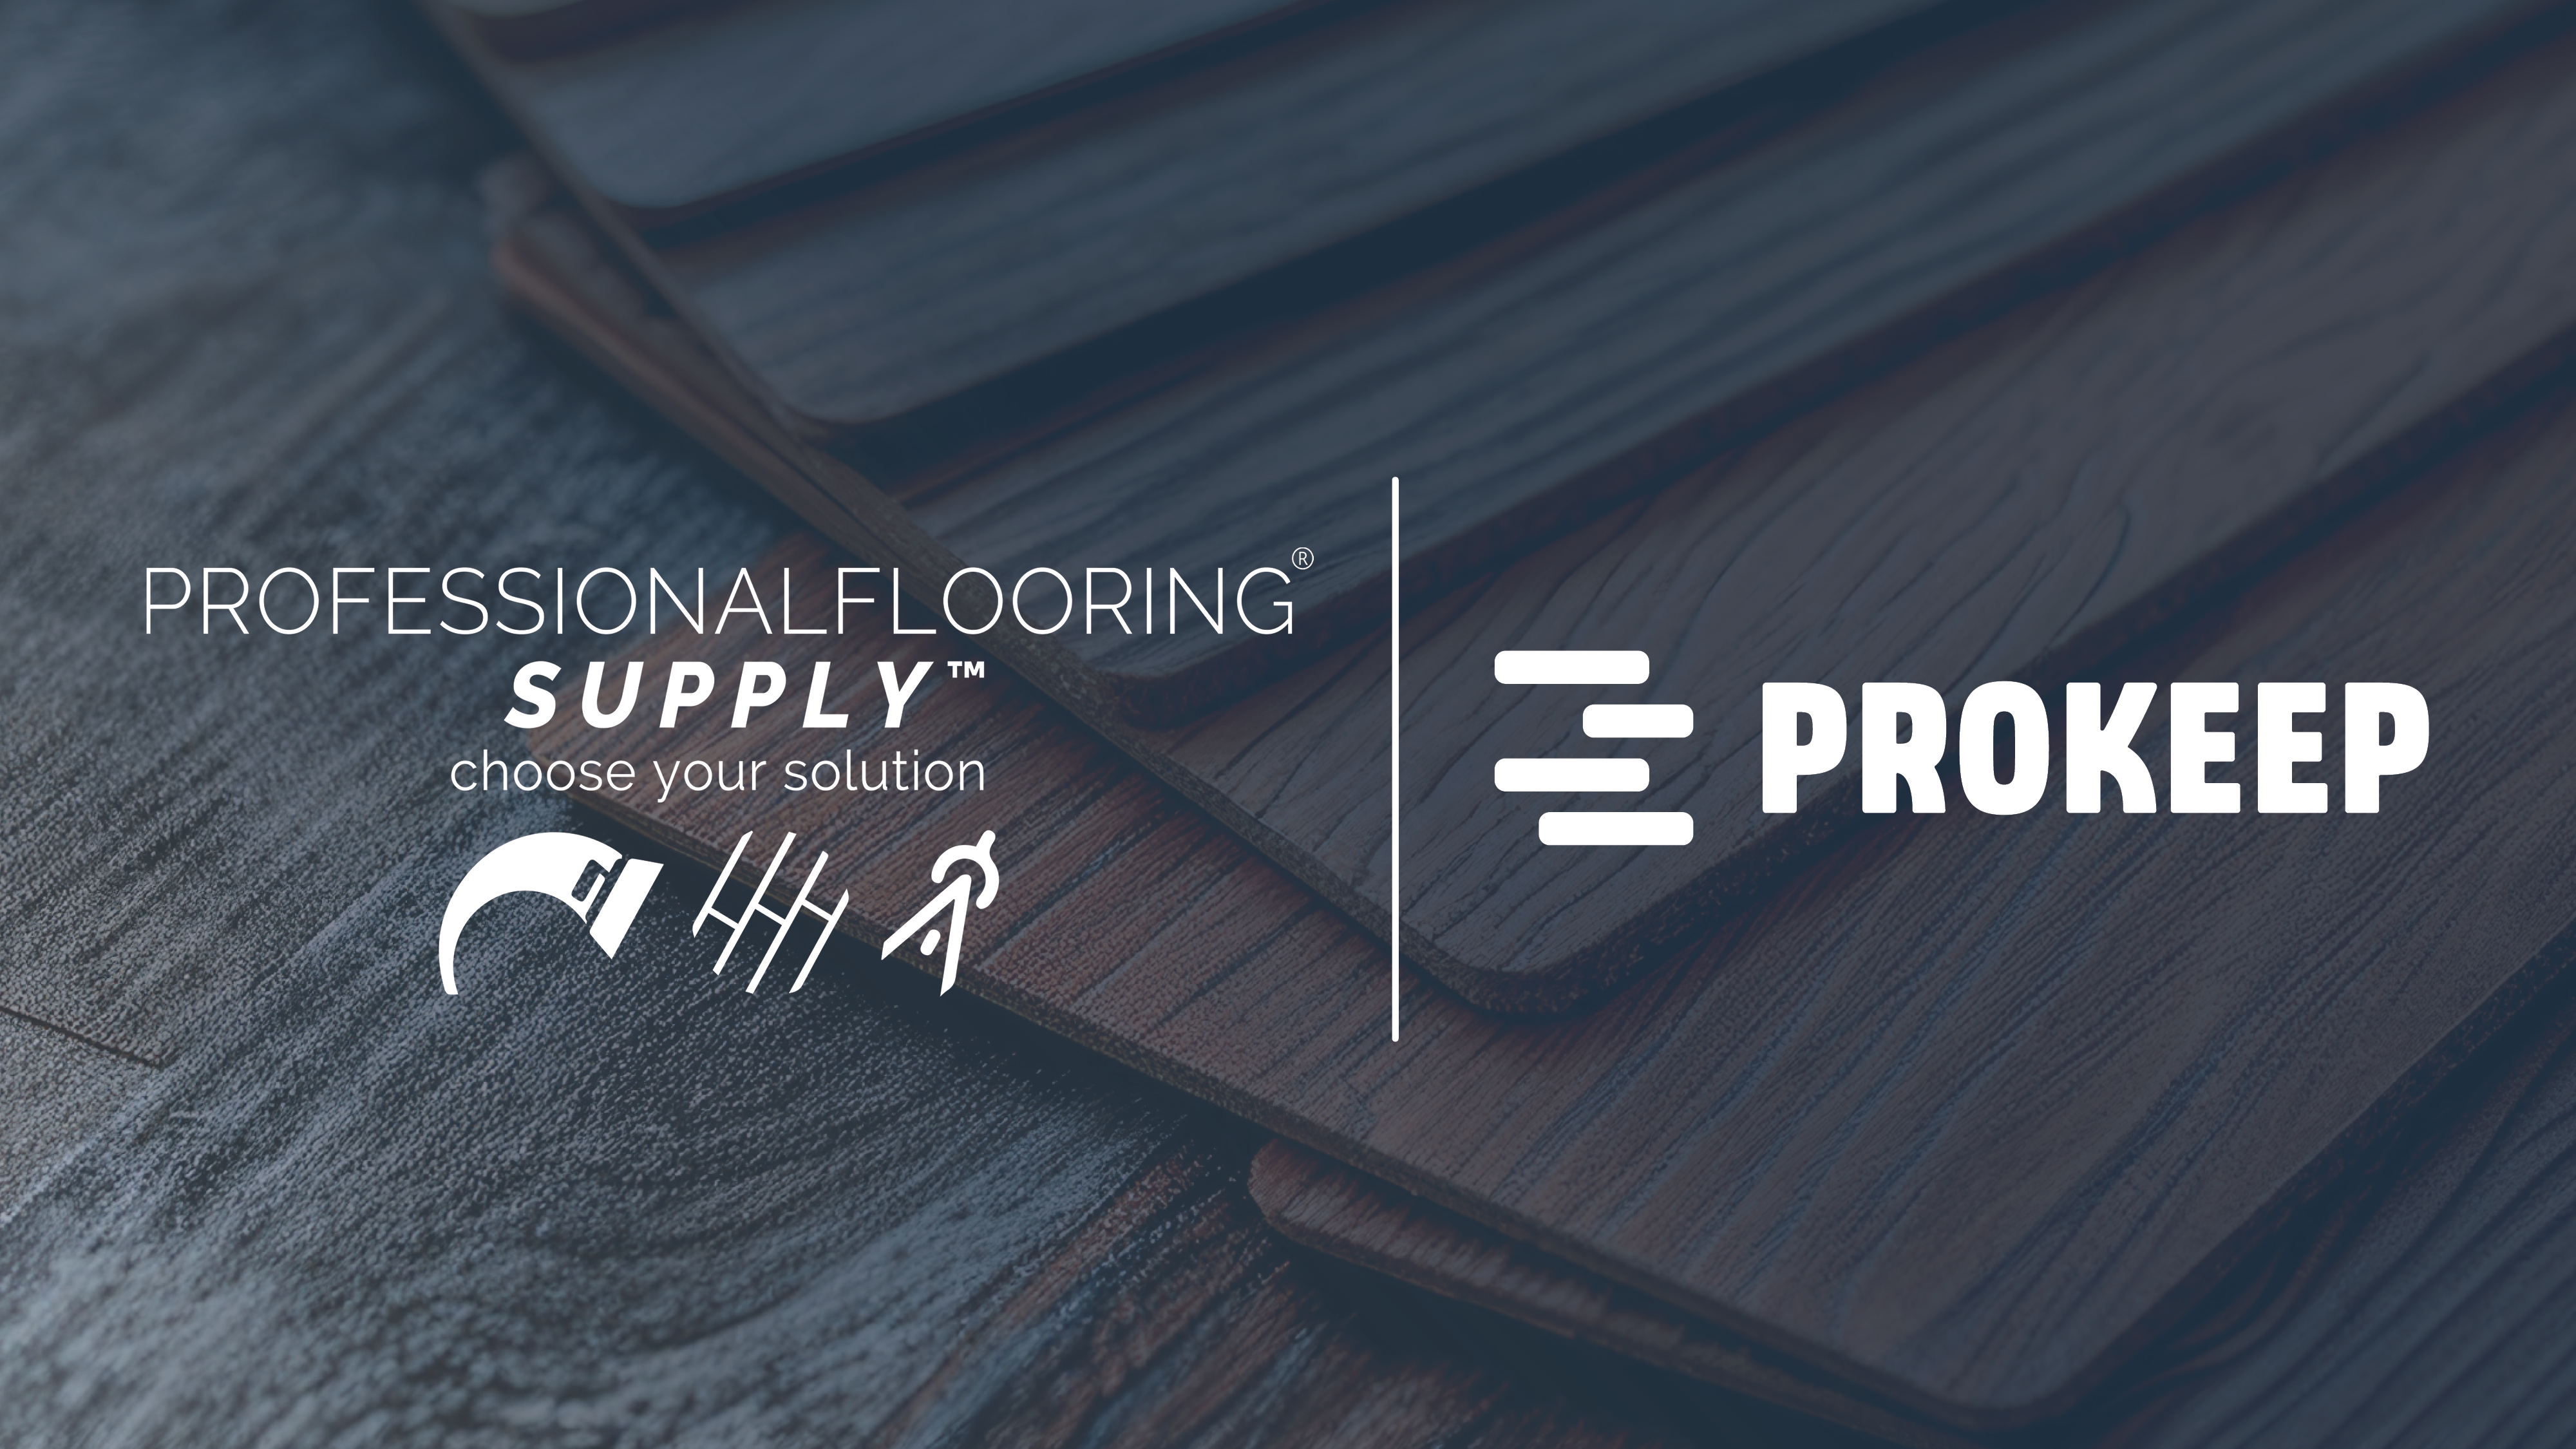 Professional Flooring Supply delivers a better customer experience with centralized messaging thumbnail